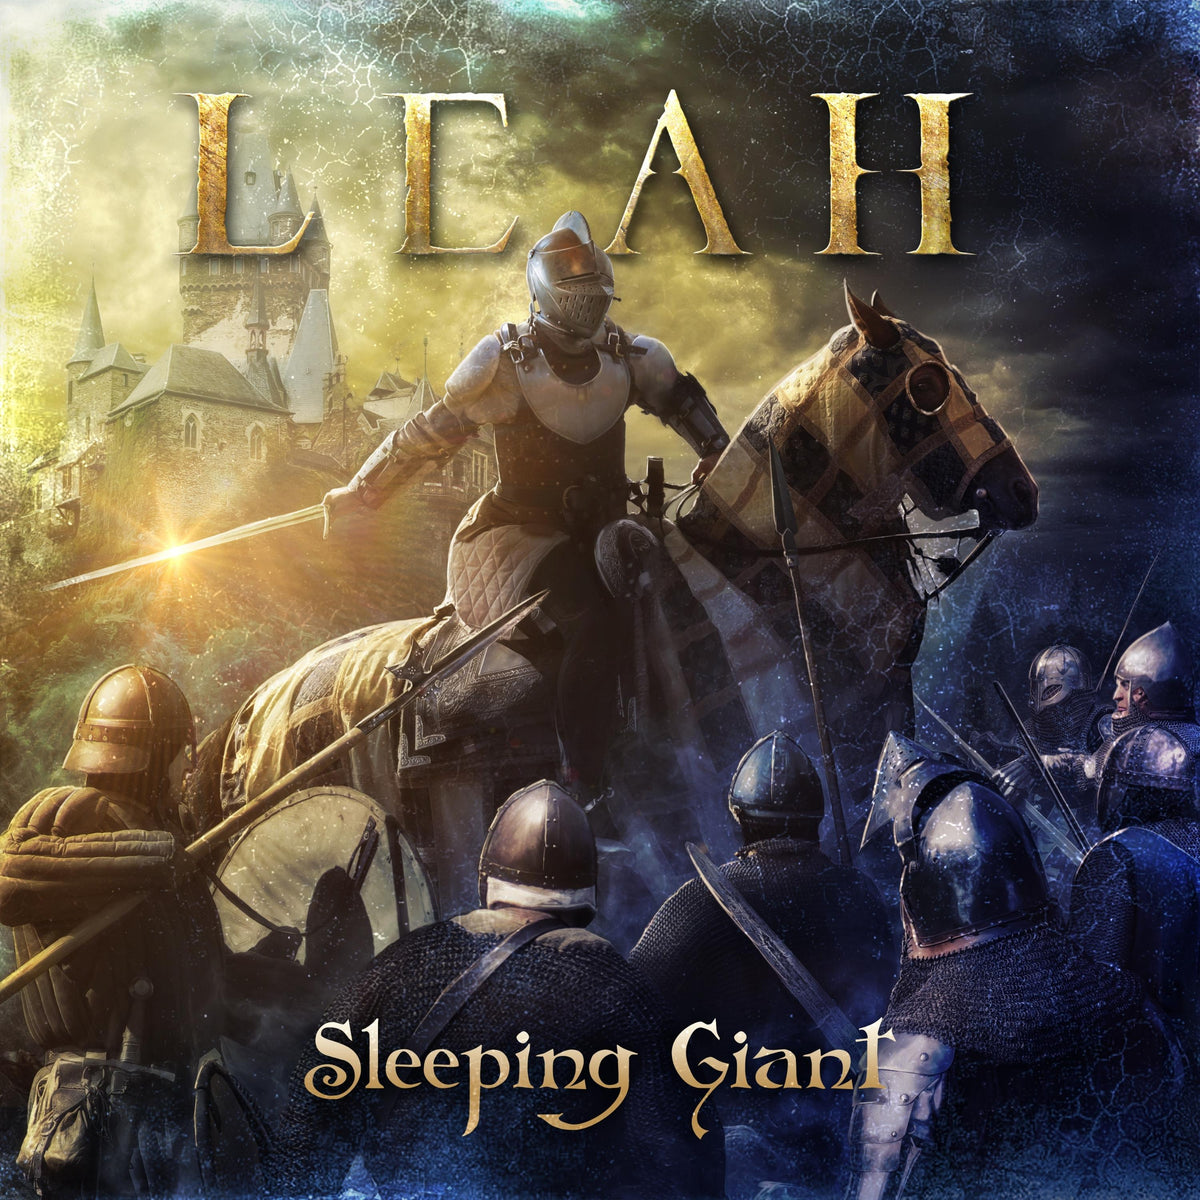 The Glory and the Fallen - Sleeping Giant (Folk Version) Deluxe Download